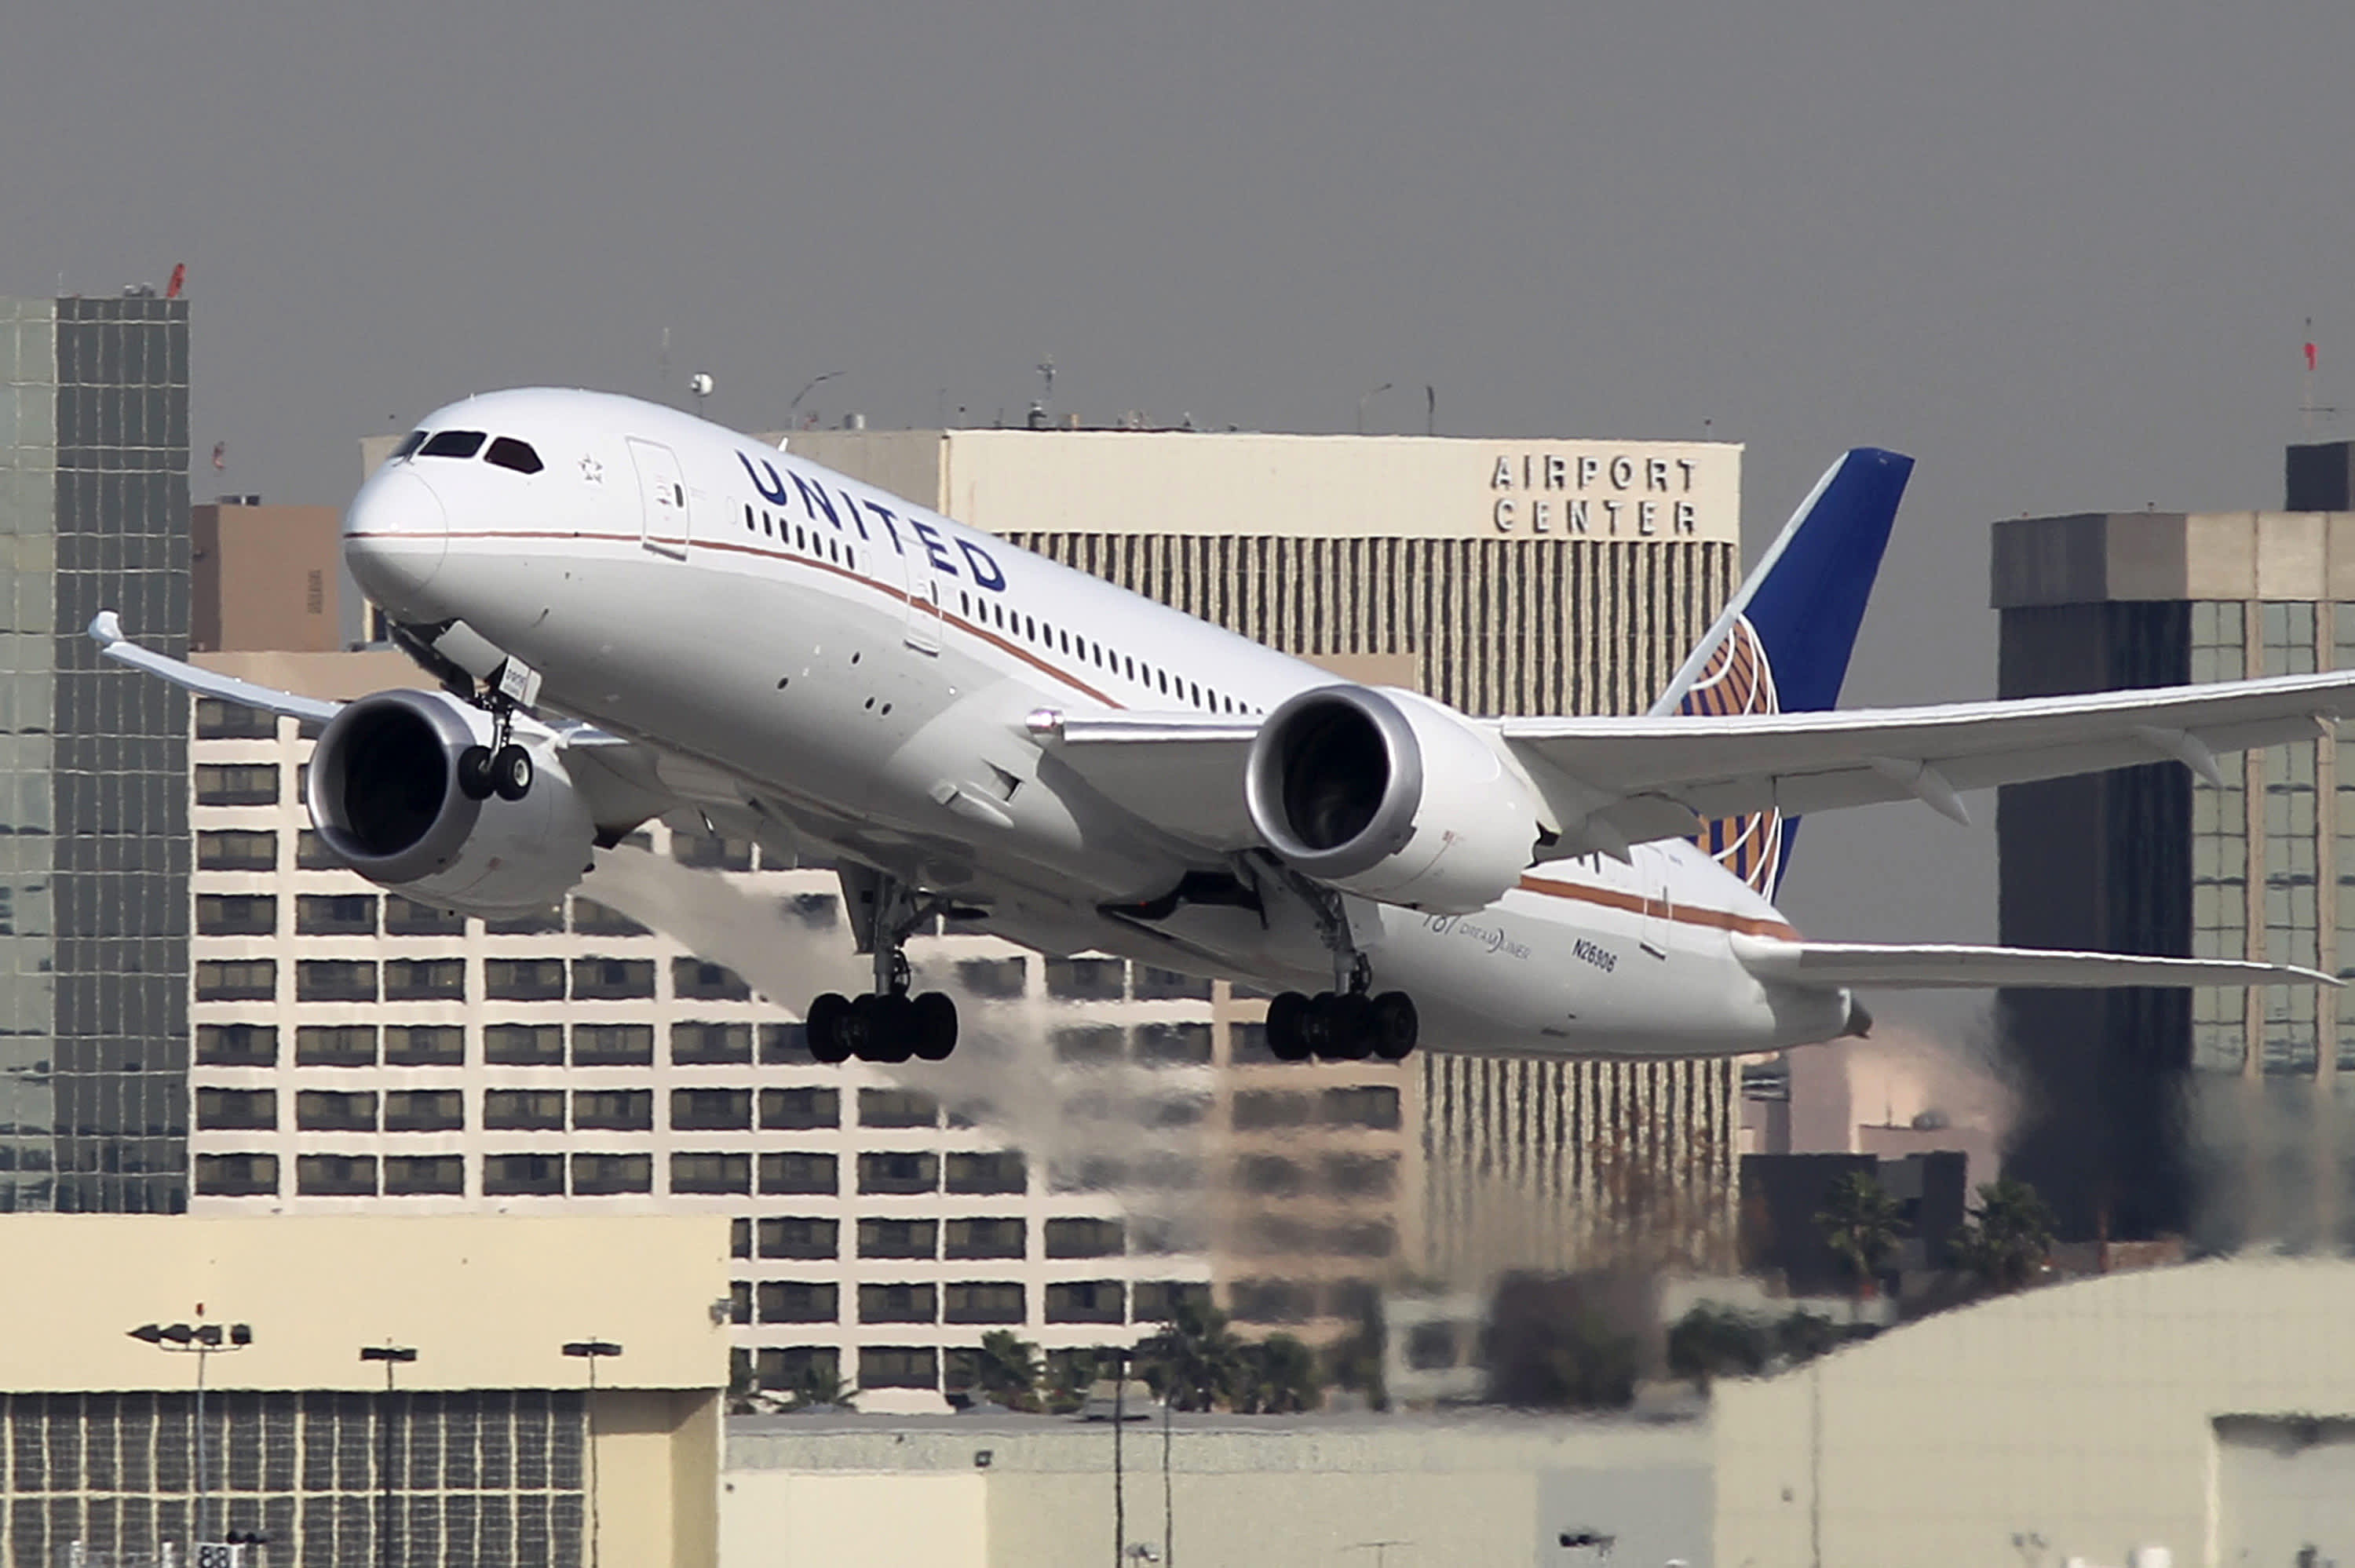 United earnings (UAL) in the fourth quarter of 2020